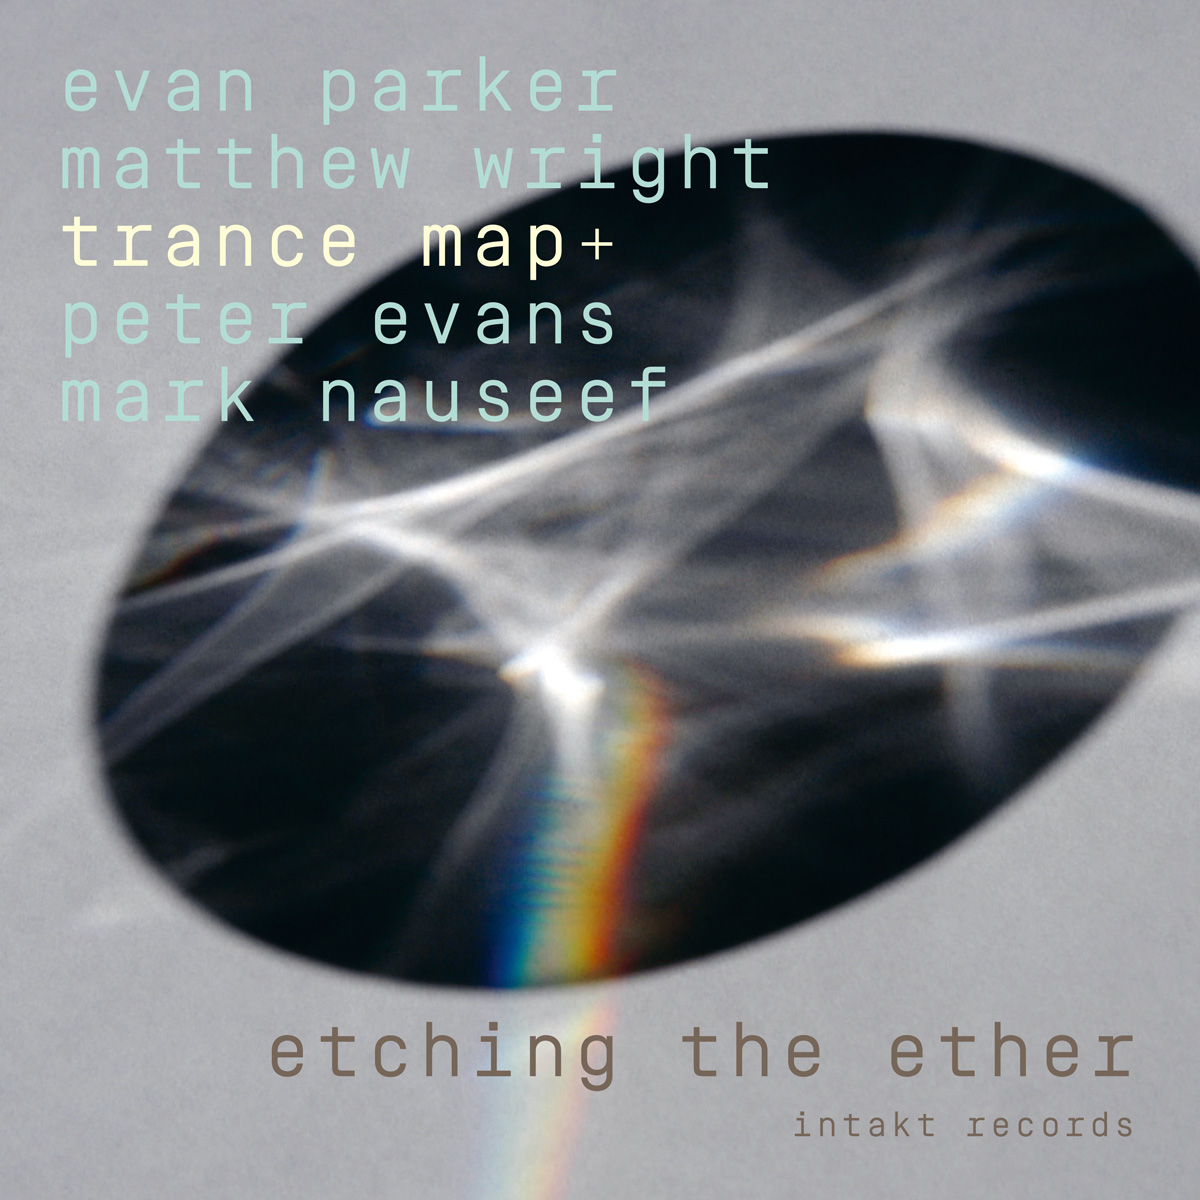 Cover Web:EVAN PARKER MATTHEW WRIGHT TRANCE MAP+
PETER EVANS AND MARK NAUSEEF
ETCHING THE ETHER Intakt CD 409 